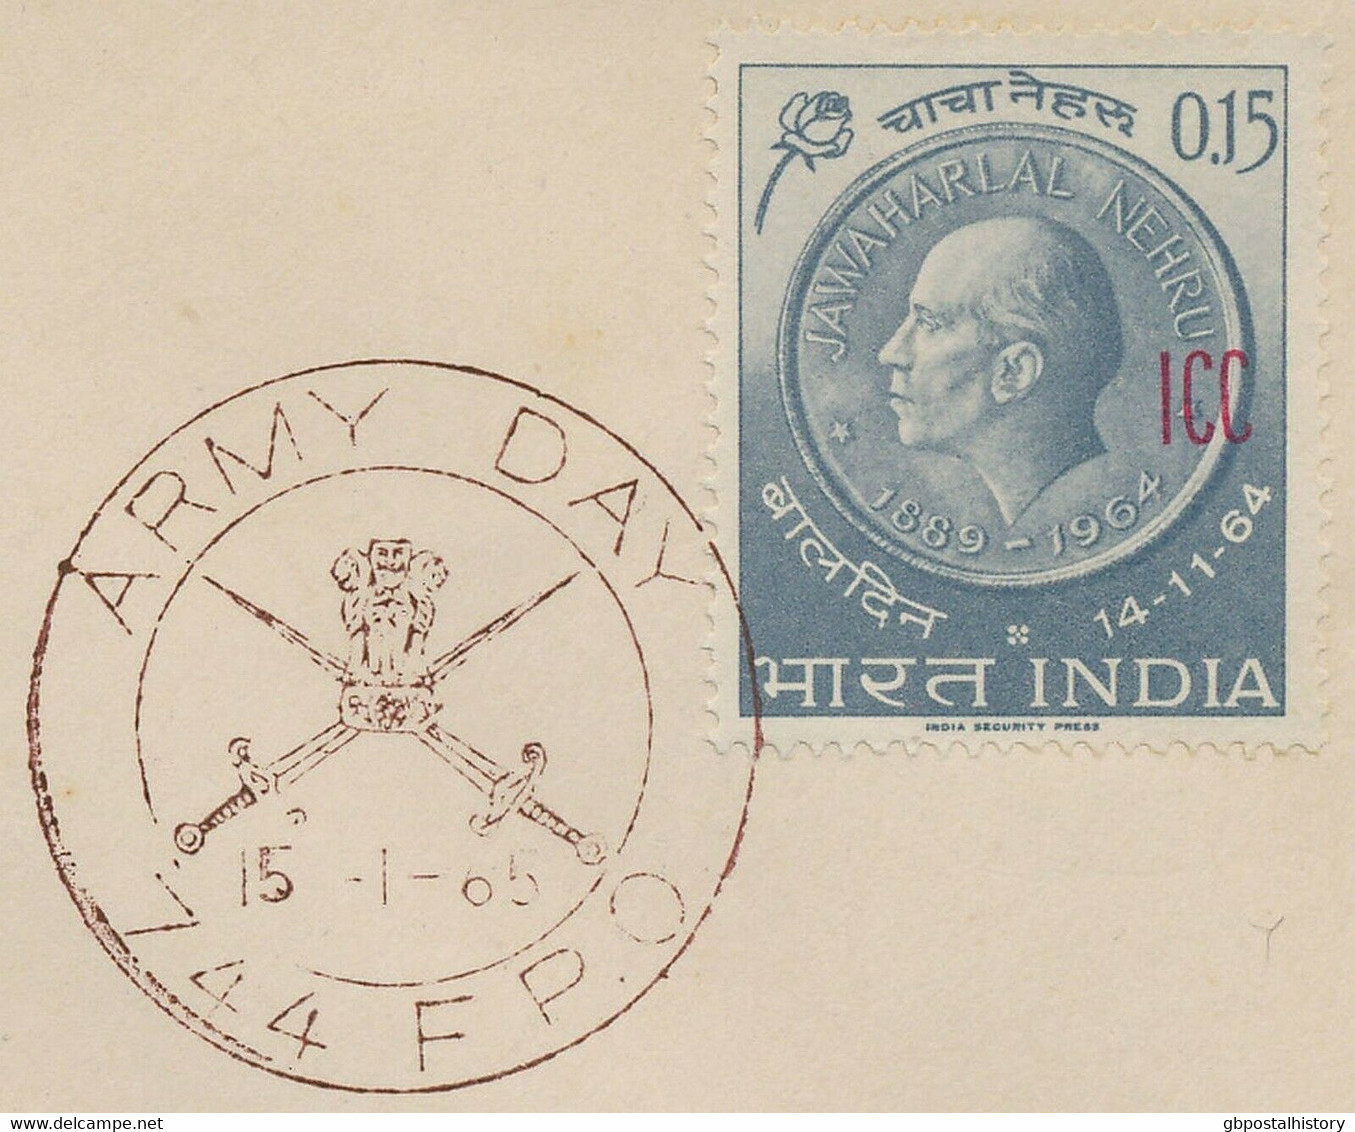 INDIA Indian Police Forces In Laos 1965 Army Day  "ARMY DAY / 744 F.P.O." FDC R! - Militaire Vrijstelling Van Portkosten